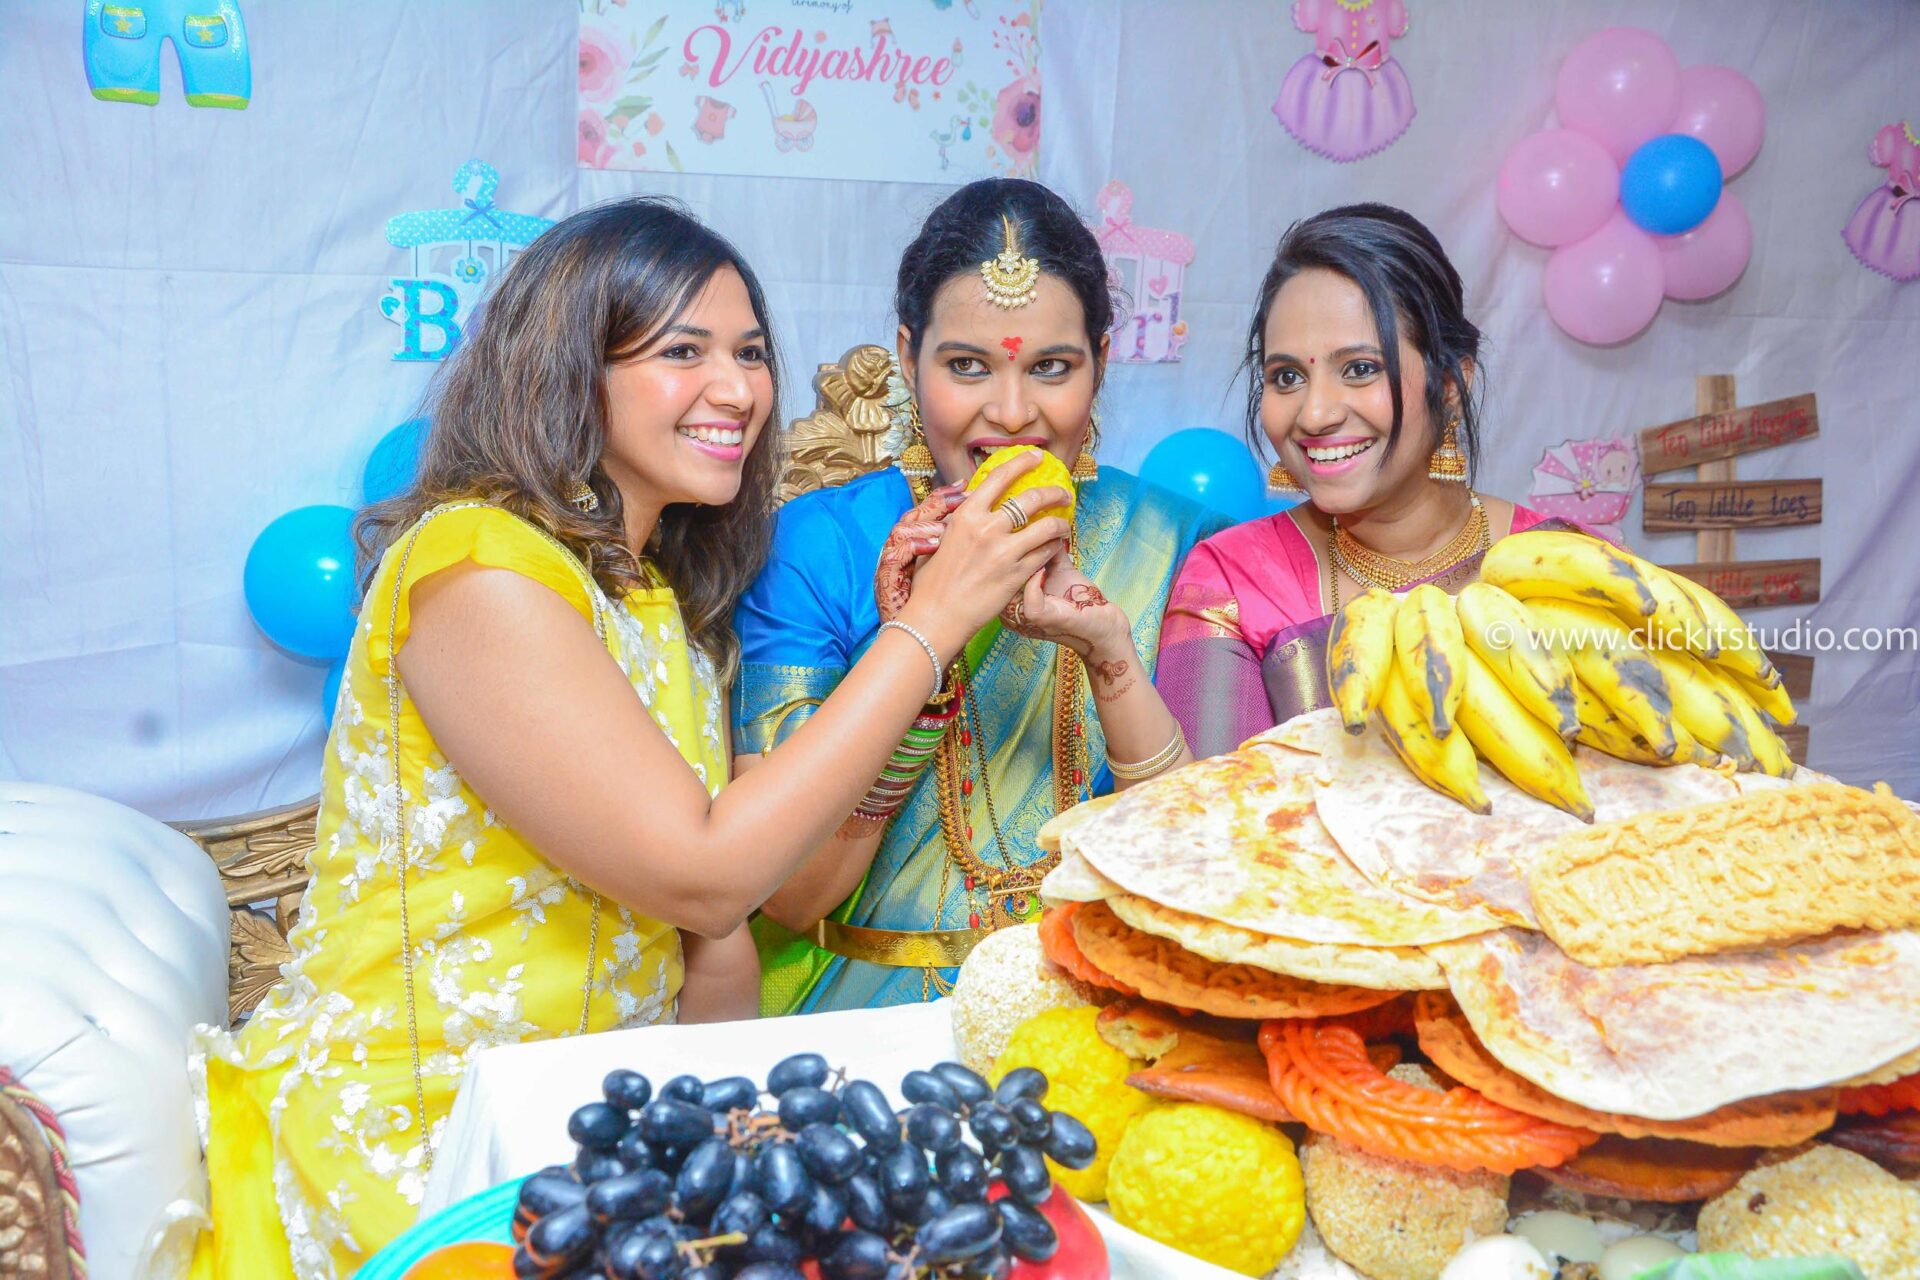 Heartwarming Baby Shower Event Captured by Mumbai Experts